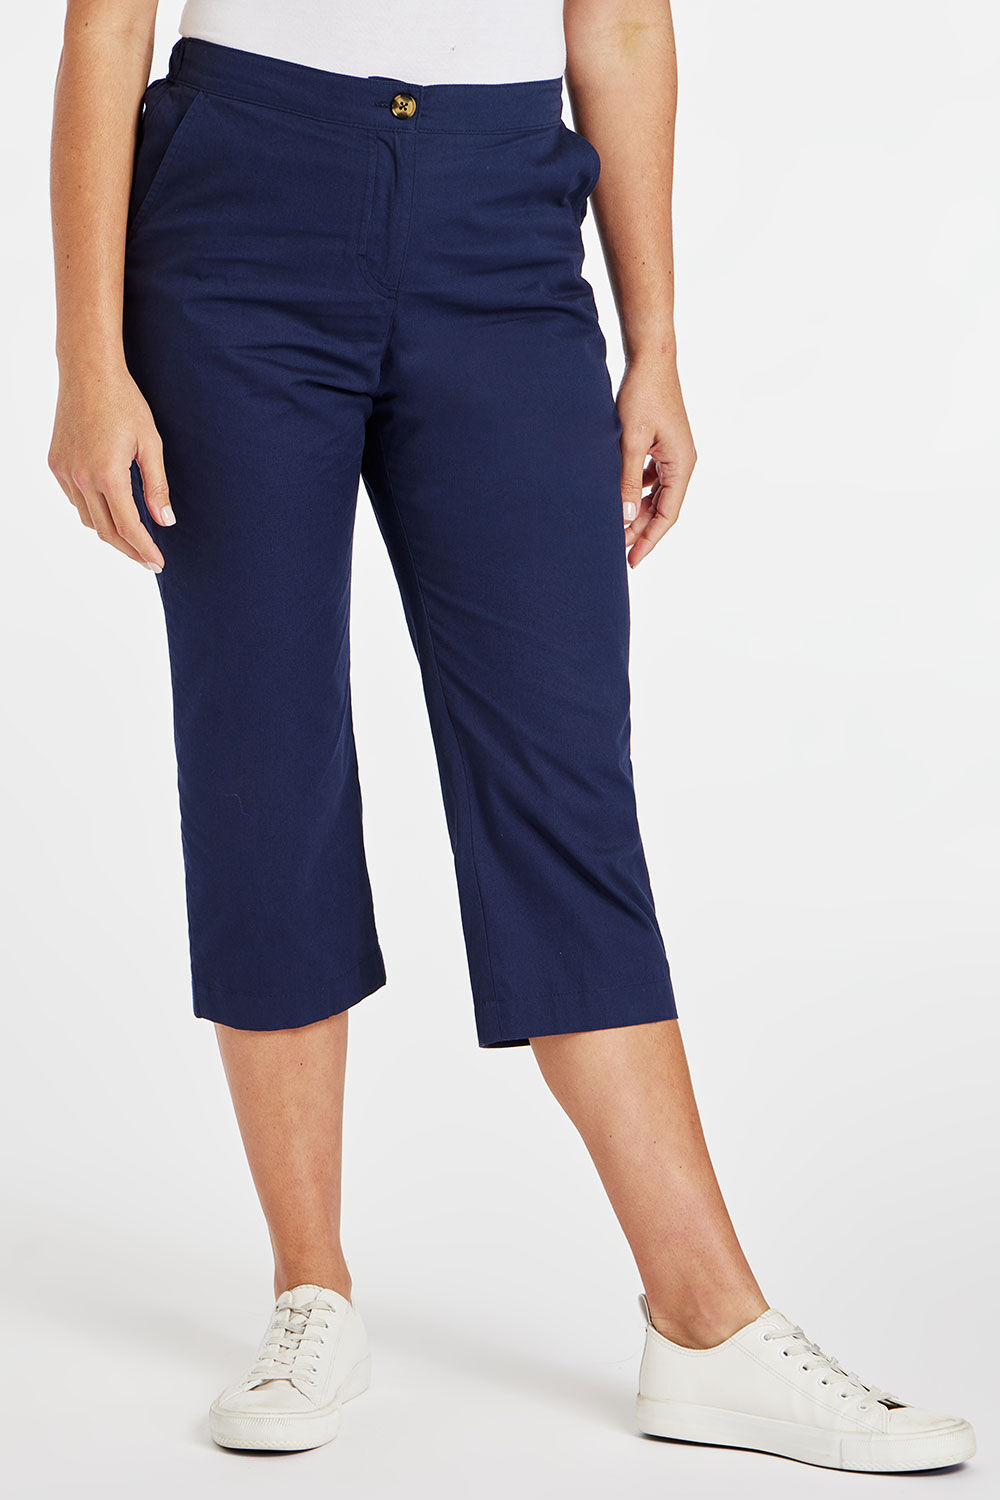 Bonmarche Navy Cropped Elasticated Trousers, Size: 12